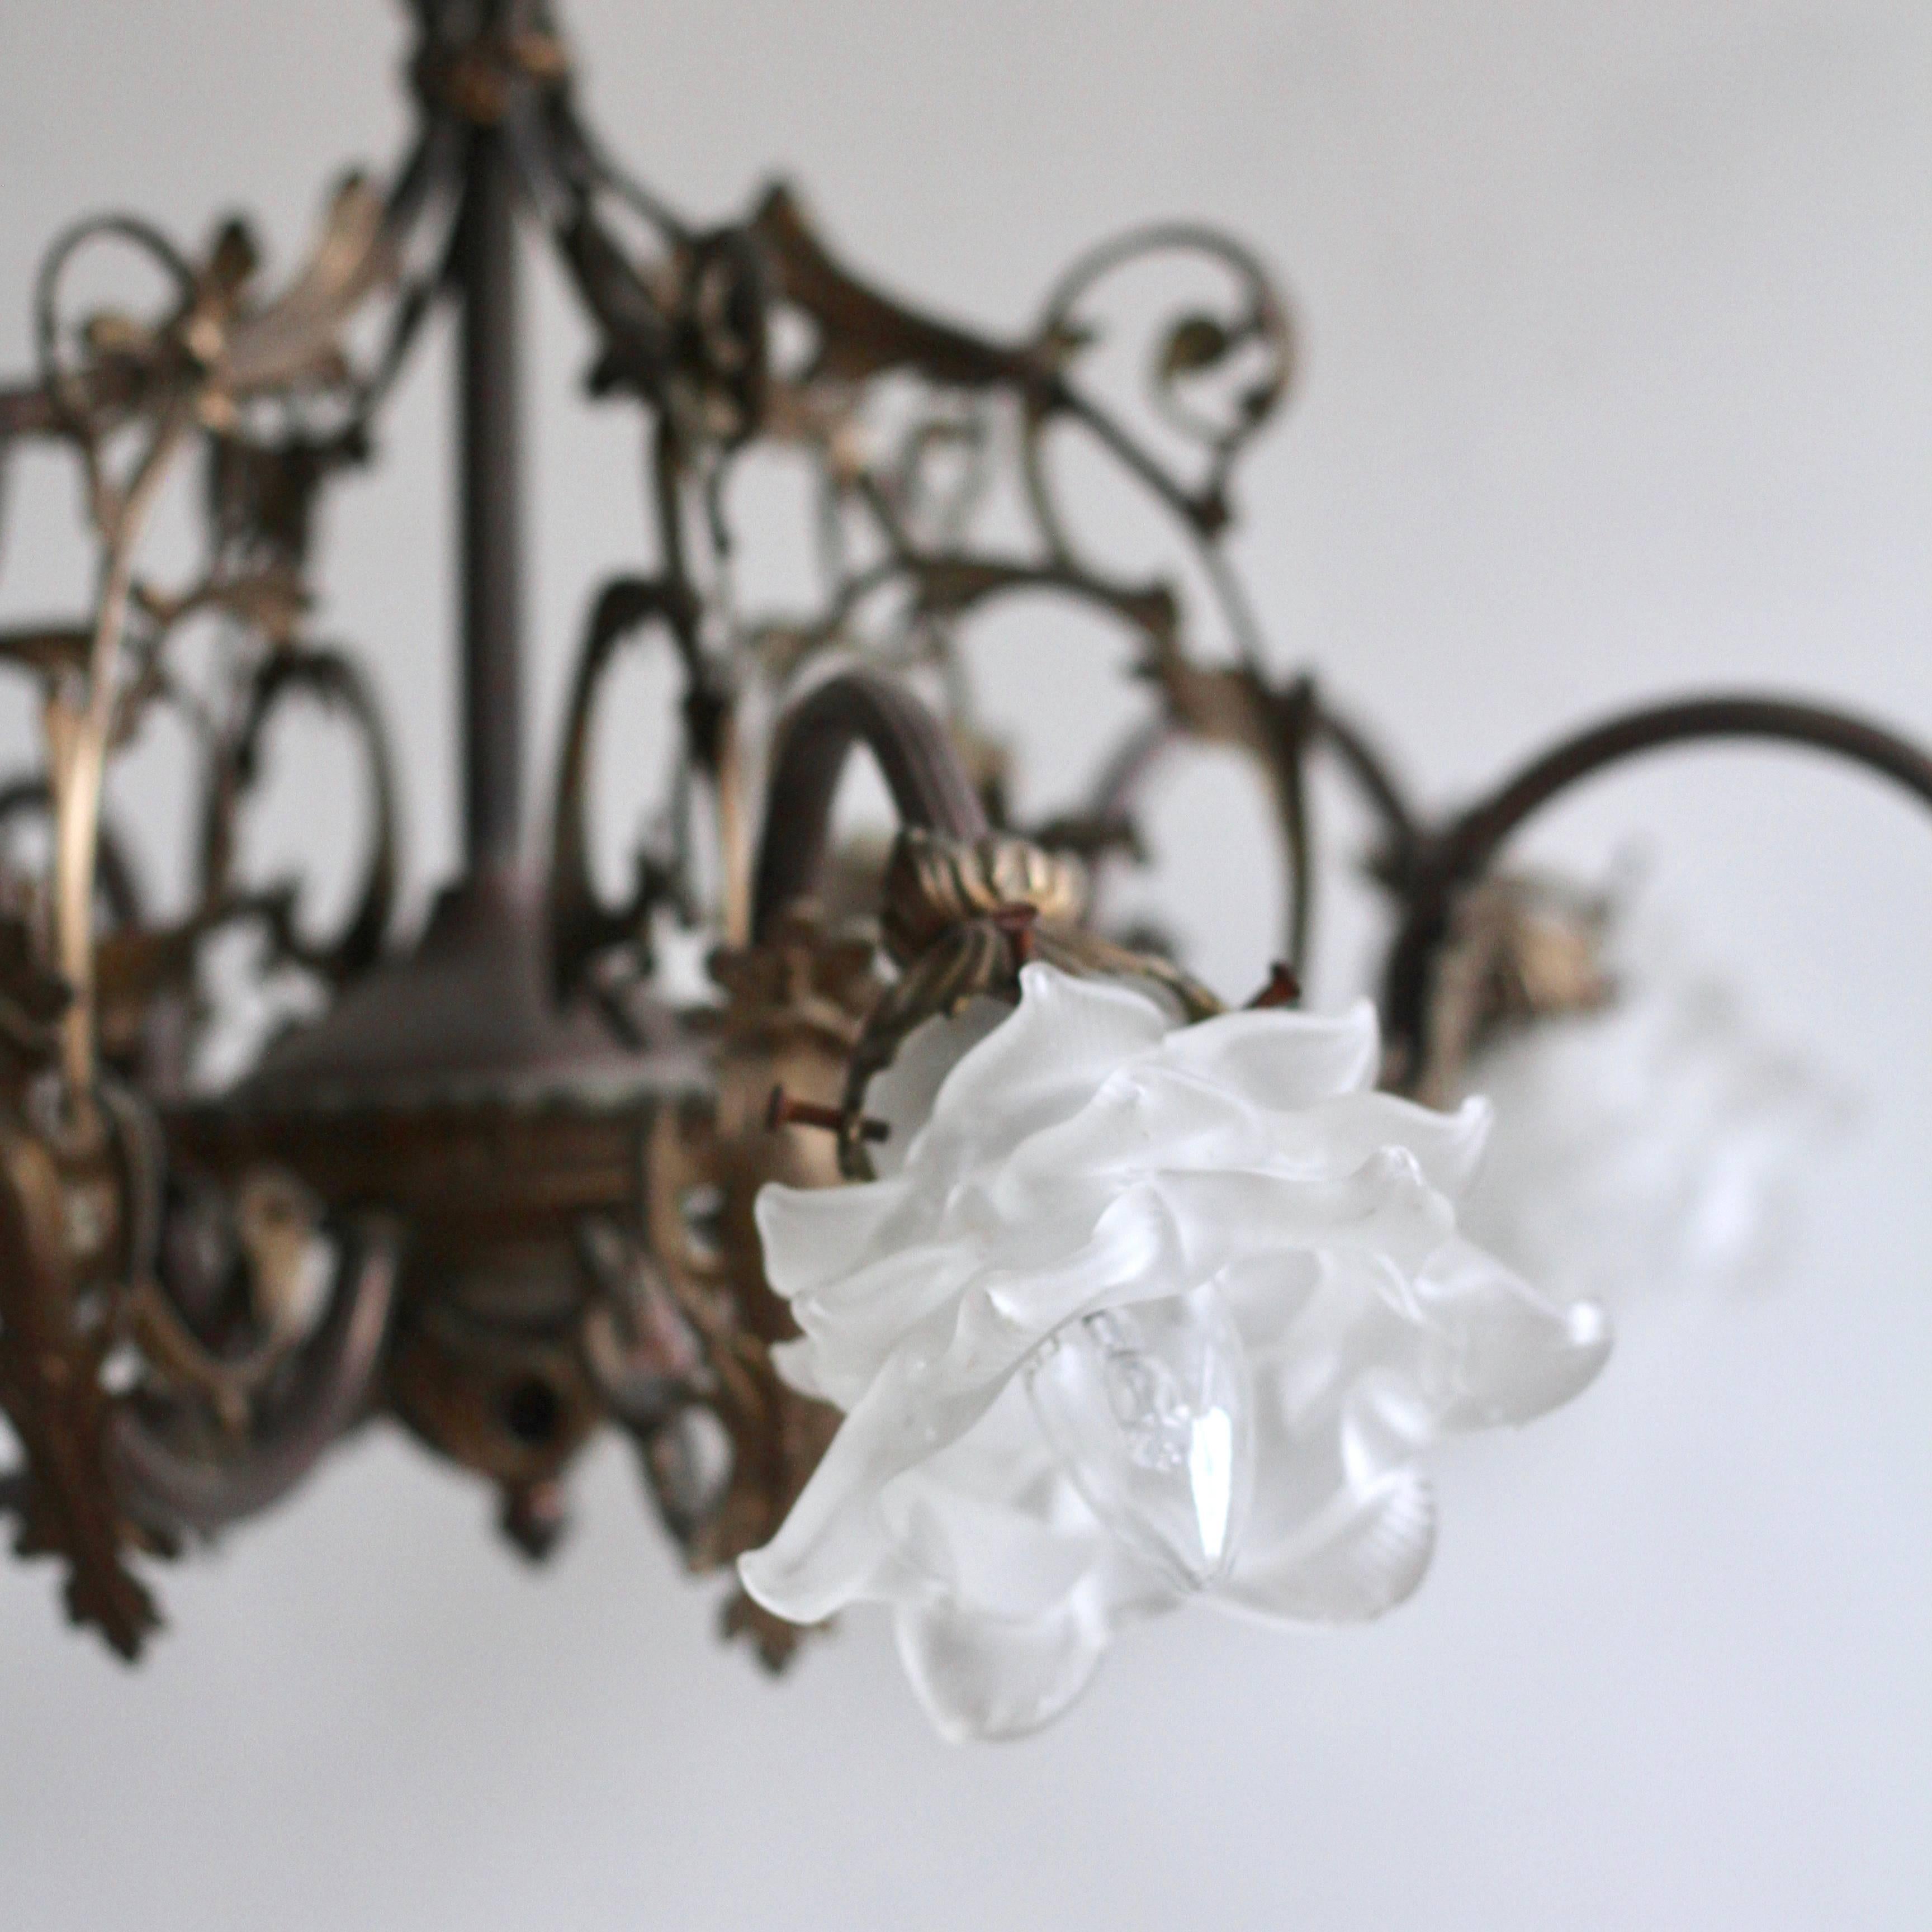 Cast 1920s Decorative Brass Downlighter Chandelier with Frosted Floral Shades